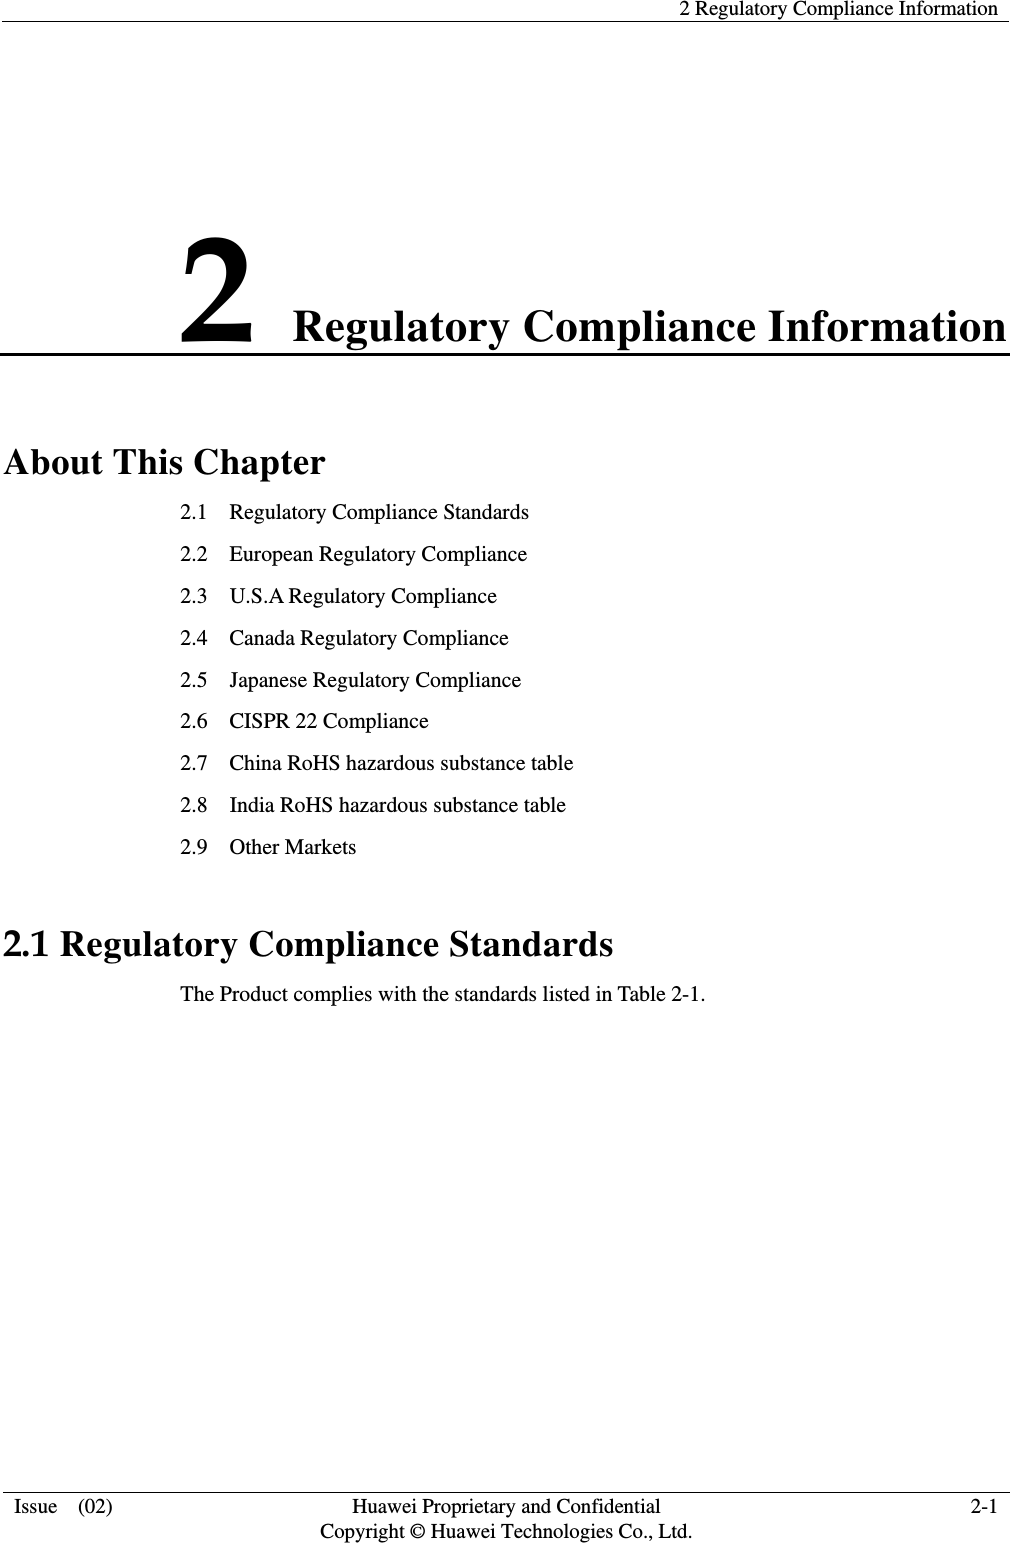    2 Regulatory Compliance Information  Issue  (02)  Huawei Proprietary and Confidential     Copyright © Huawei Technologies Co., Ltd. 2-1 2 Regulatory Compliance Information About This Chapter 2.1    Regulatory Compliance Standards 2.2  European Regulatory Compliance 2.3  U.S.A Regulatory Compliance                  2.4  Canada Regulatory Compliance 2.5  Japanese Regulatory Compliance 2.6    CISPR 22 Compliance     2.7    China RoHS hazardous substance table 2.8    India RoHS hazardous substance table 2.9  Other Markets 2.1 Regulatory Compliance Standards The Product complies with the standards listed in Table 2-1. 